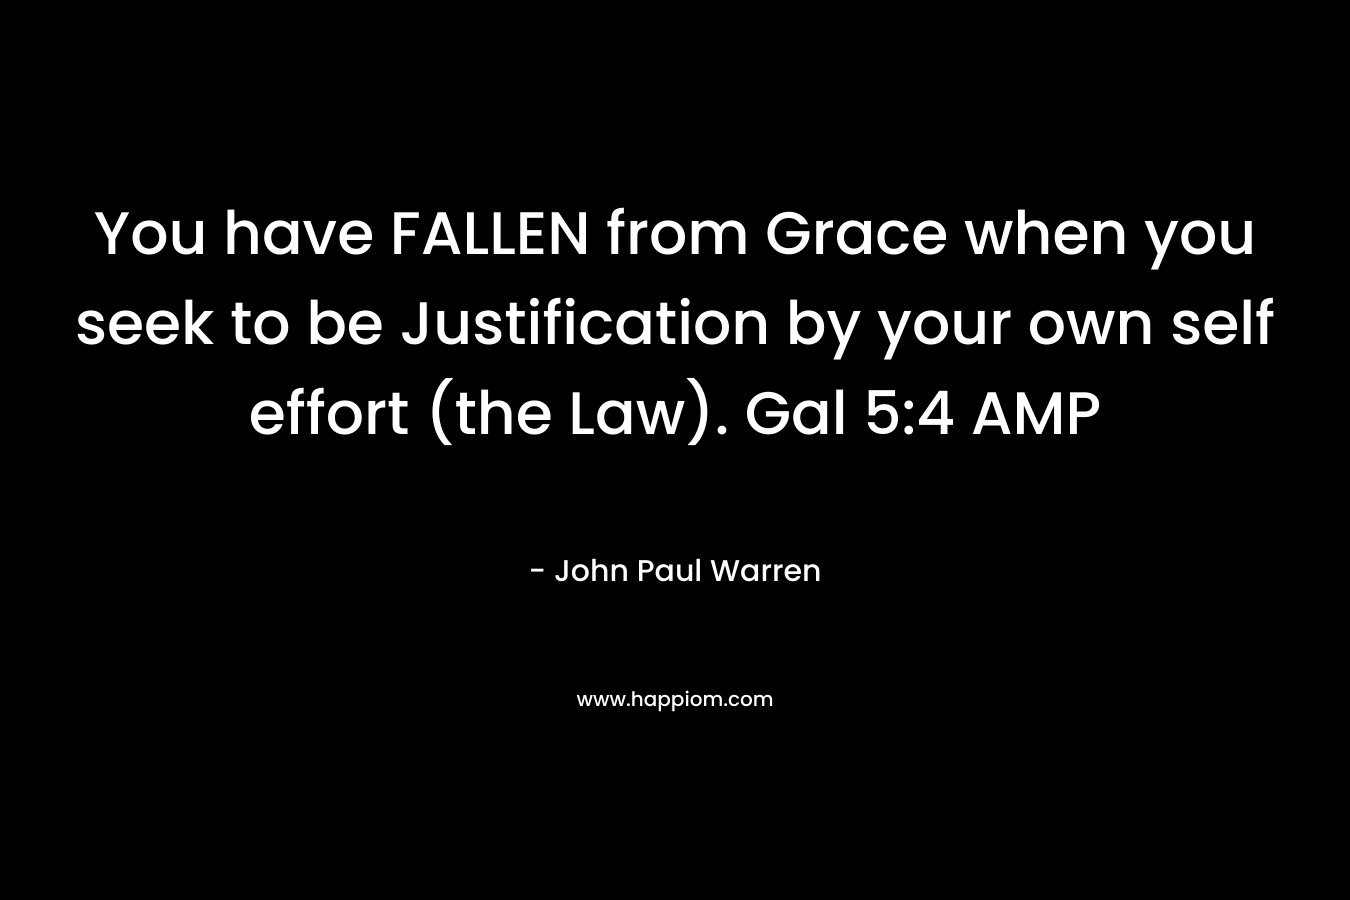 You have FALLEN from Grace when you seek to be Justification by your own self effort (the Law). Gal 5:4 AMP